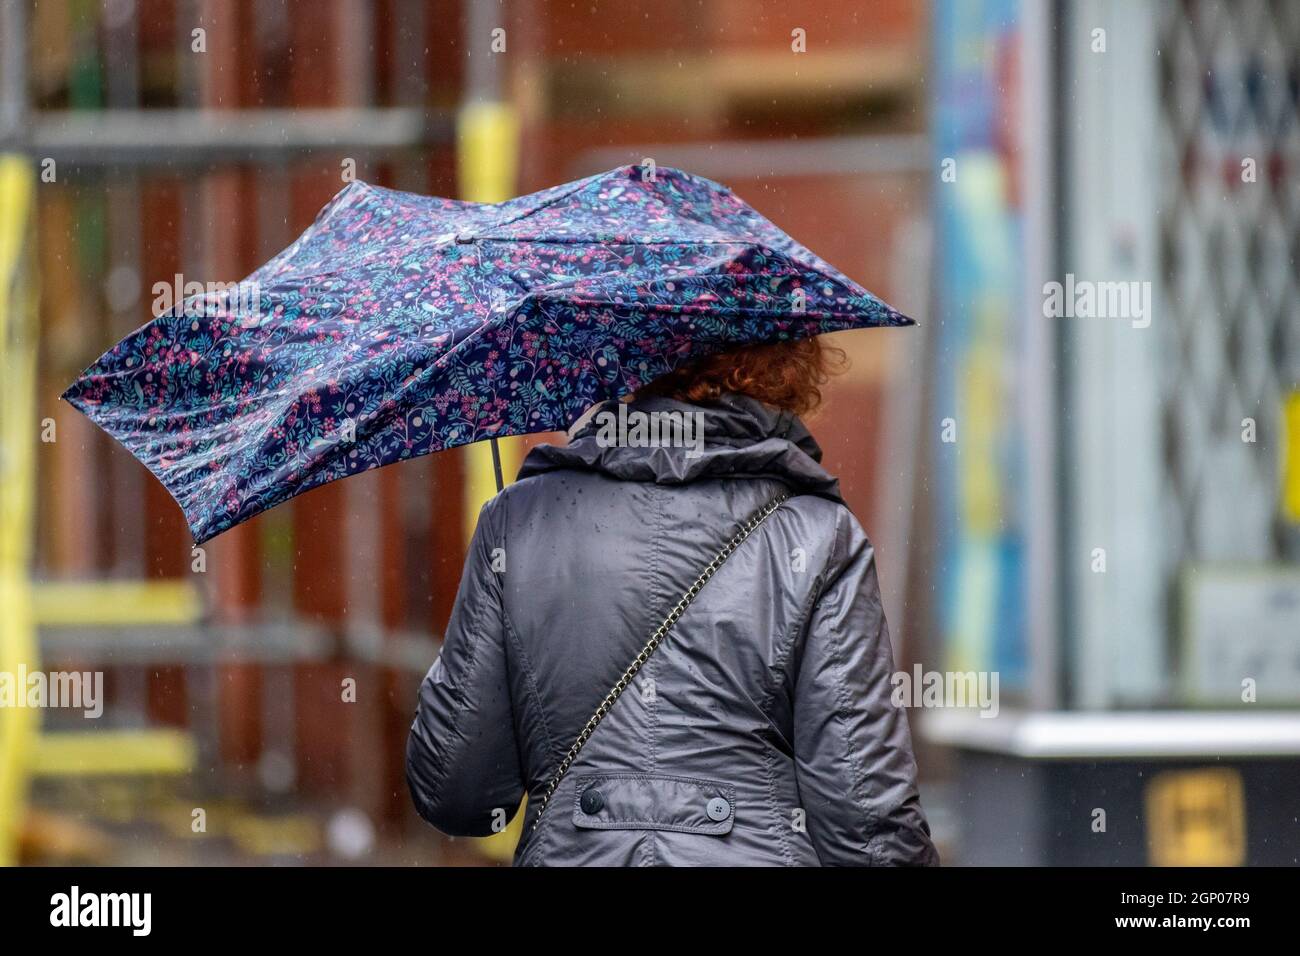 Southport, Merseyside, UK Weather; 28 Sept 2021.  Shops, shoppers shopping on a wet windy, blustry day in the north-west town centre.  Credit: MediaWorldImages/AlamyLiveNews Stock Photo